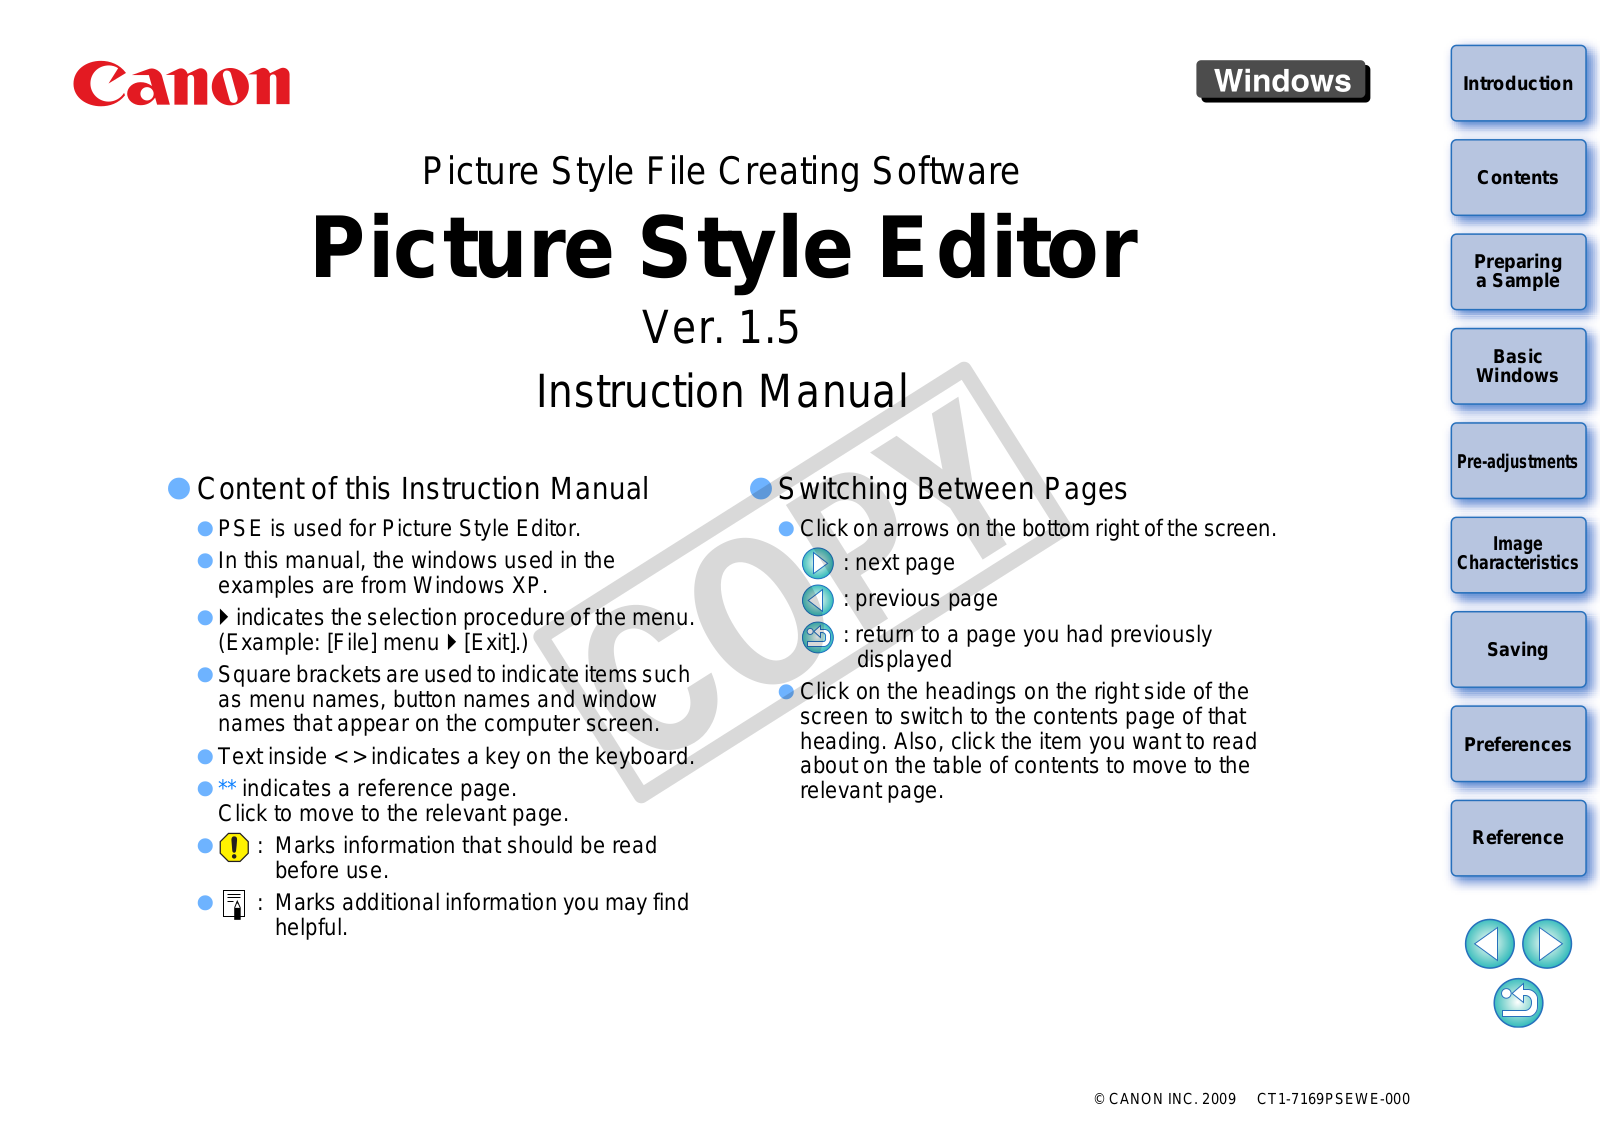 Canon picture style editor Instruction Manual for Windows